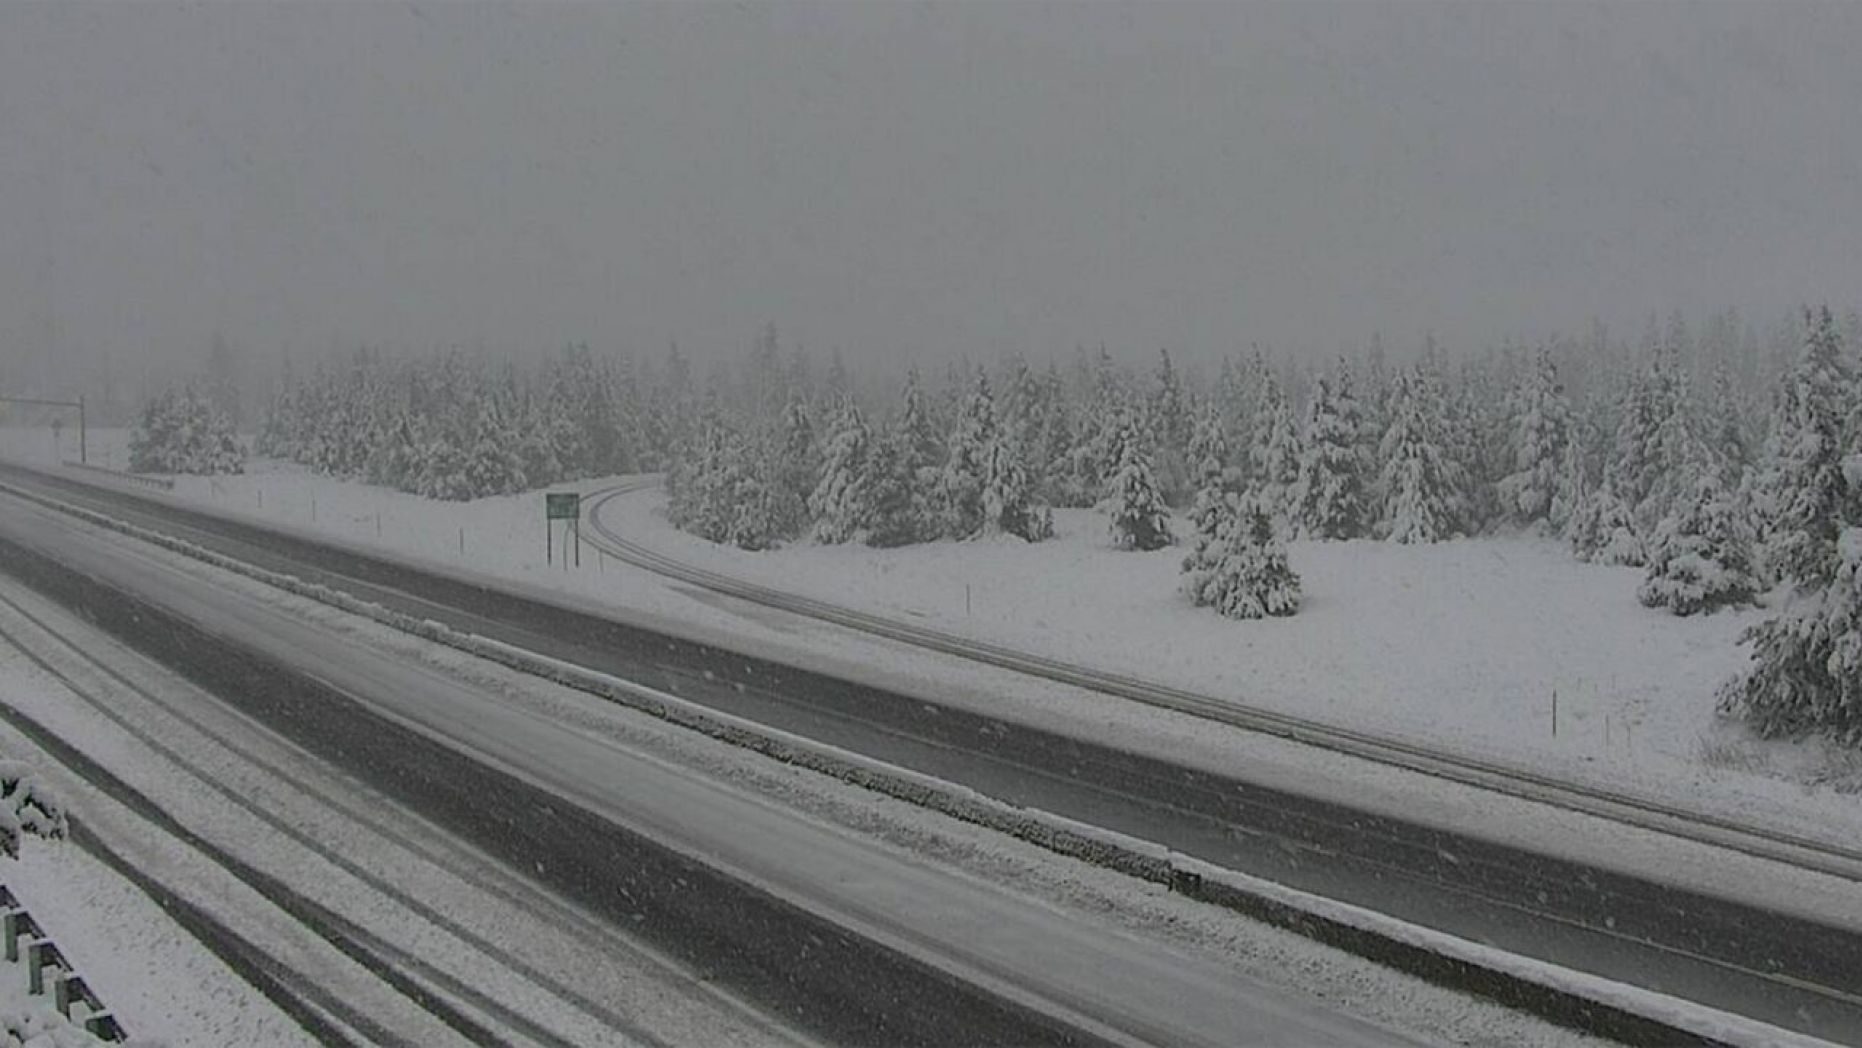 Snow falls in Homestake Pass on Interstate 90 in Montana on June 8, 2020.